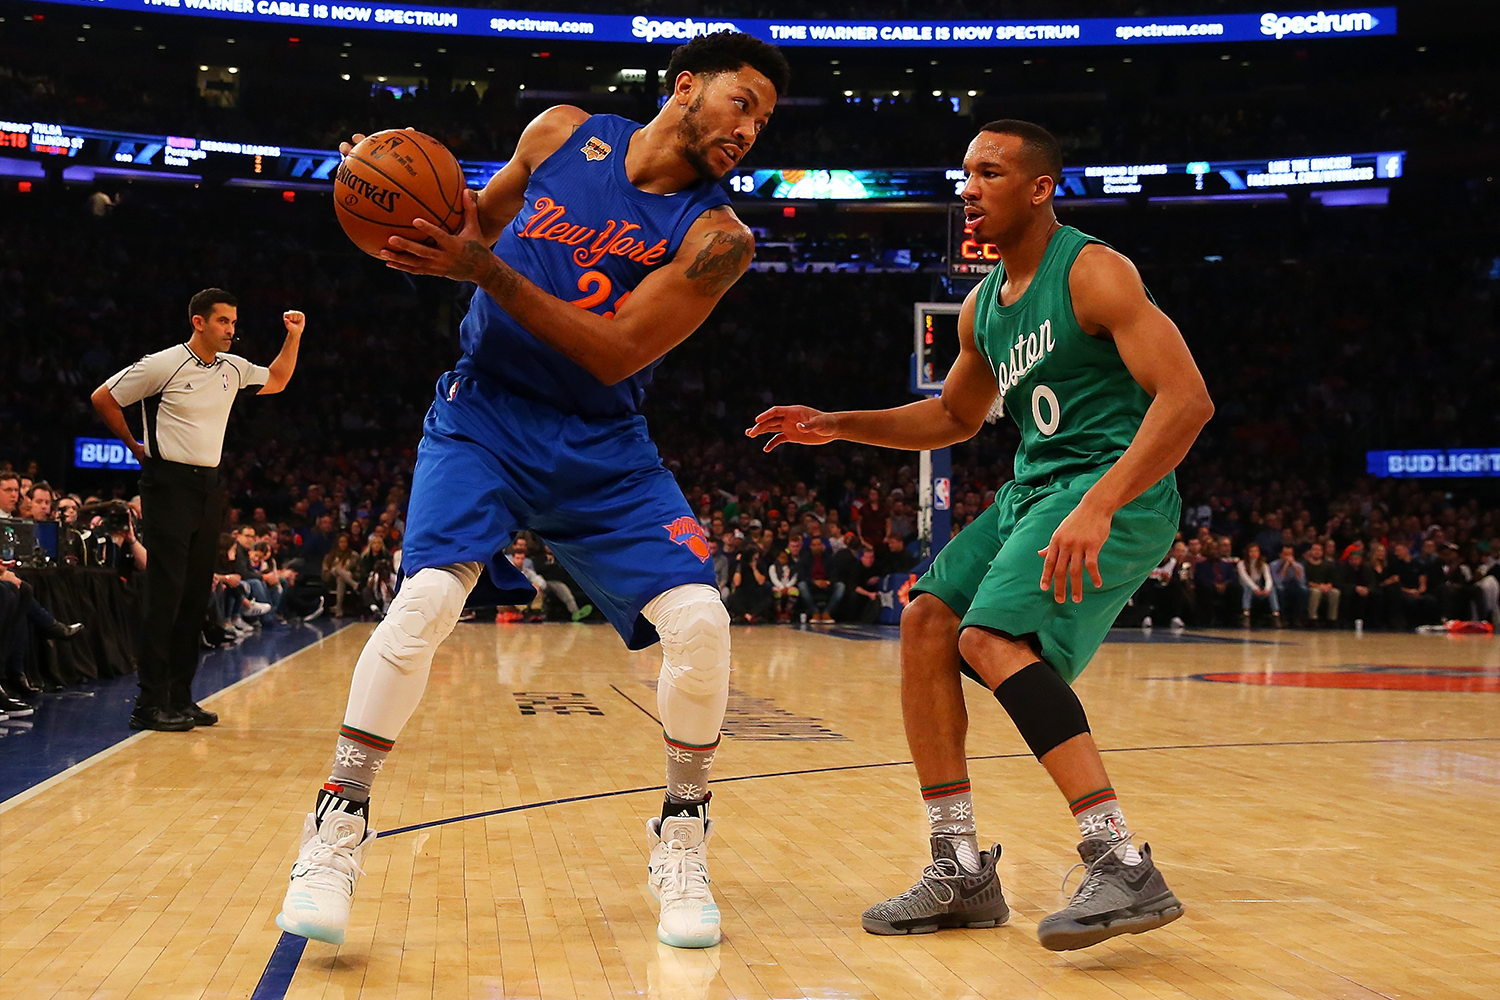 The Knicks and Celtics play in their Christmas card-inspired uniforms i 2016